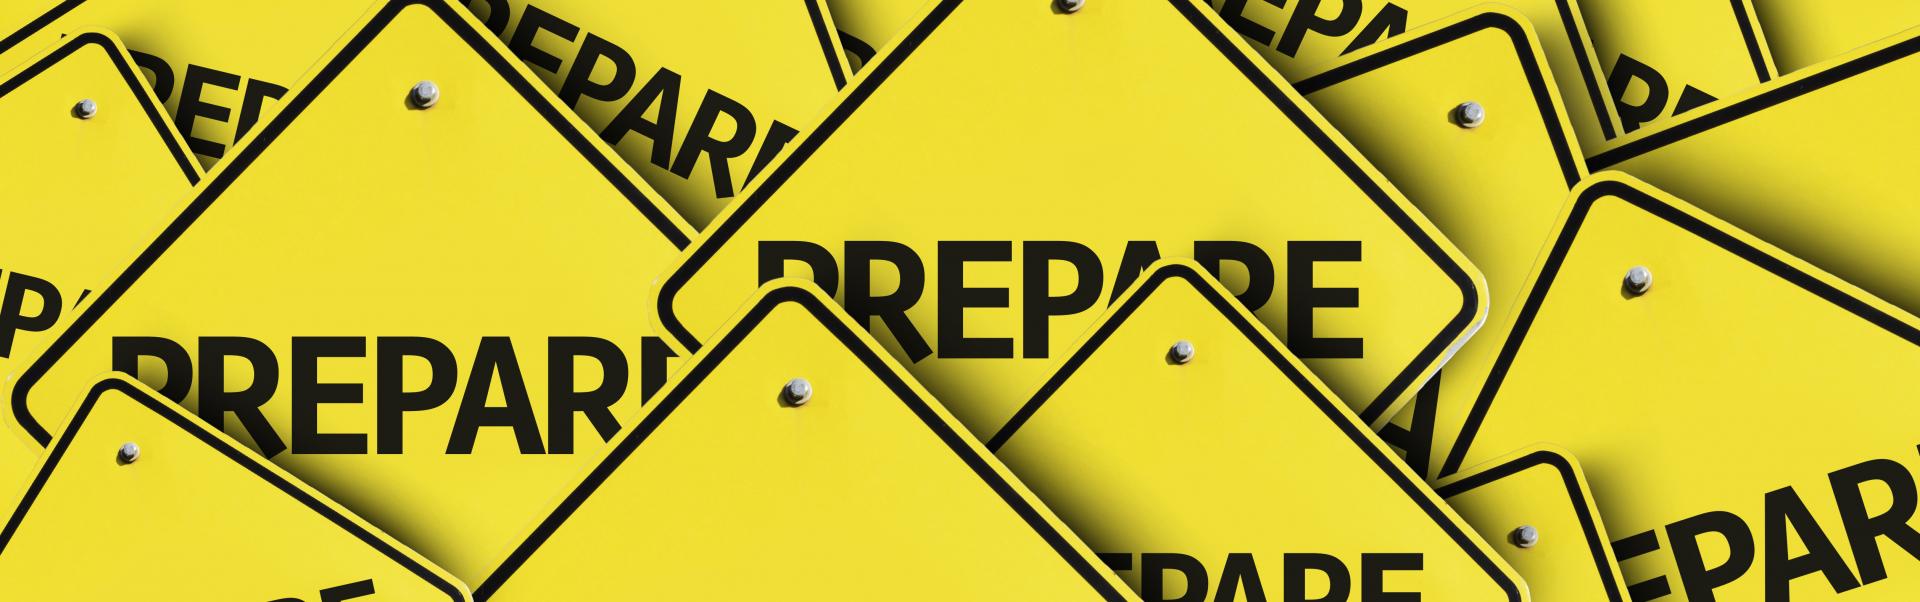 Yellow signs displaying the word "prepare"